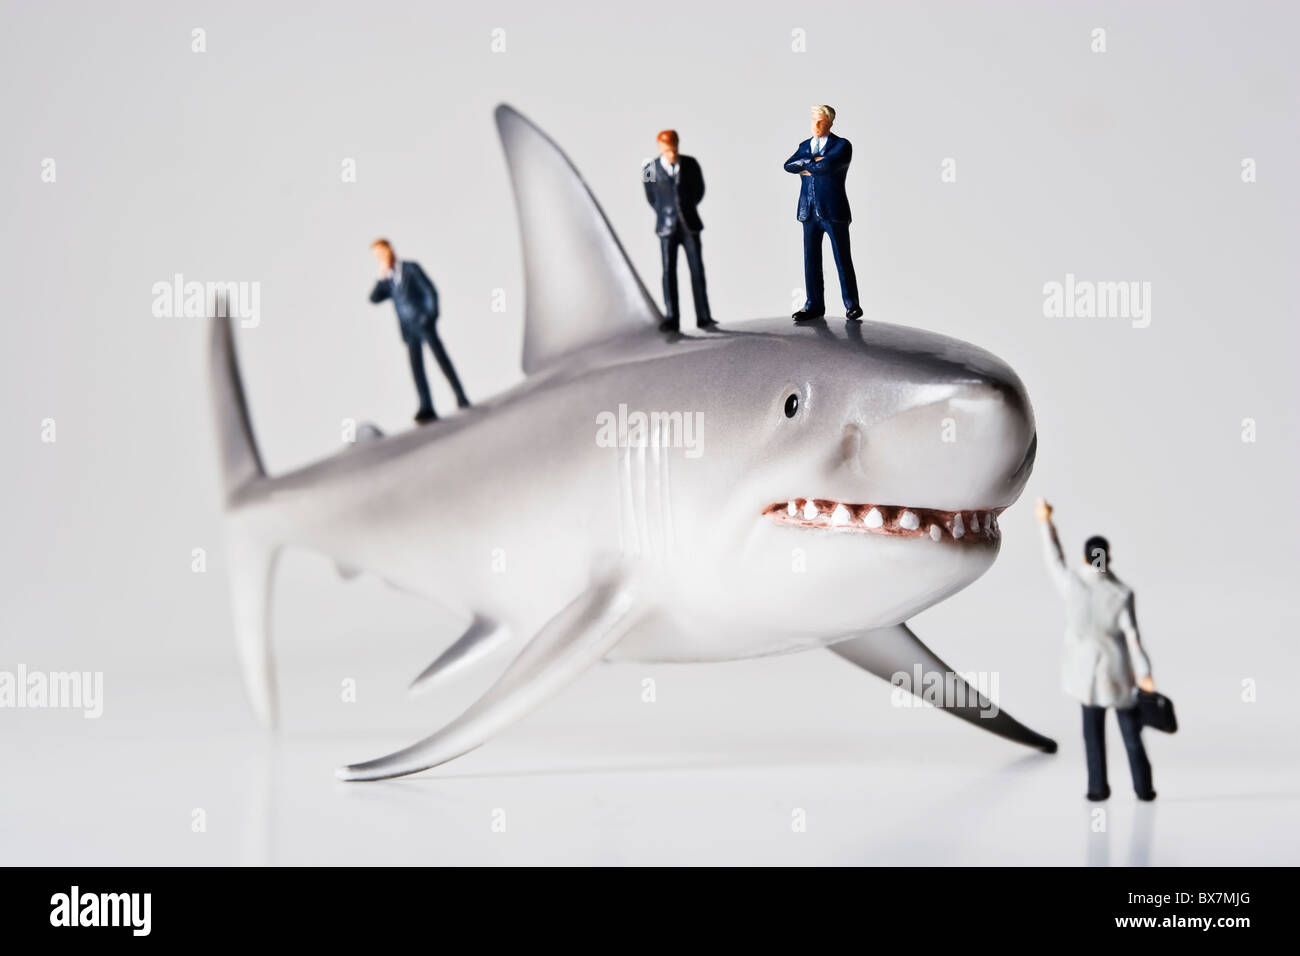 Business figurines placed with a shark figurine. Stock Photo